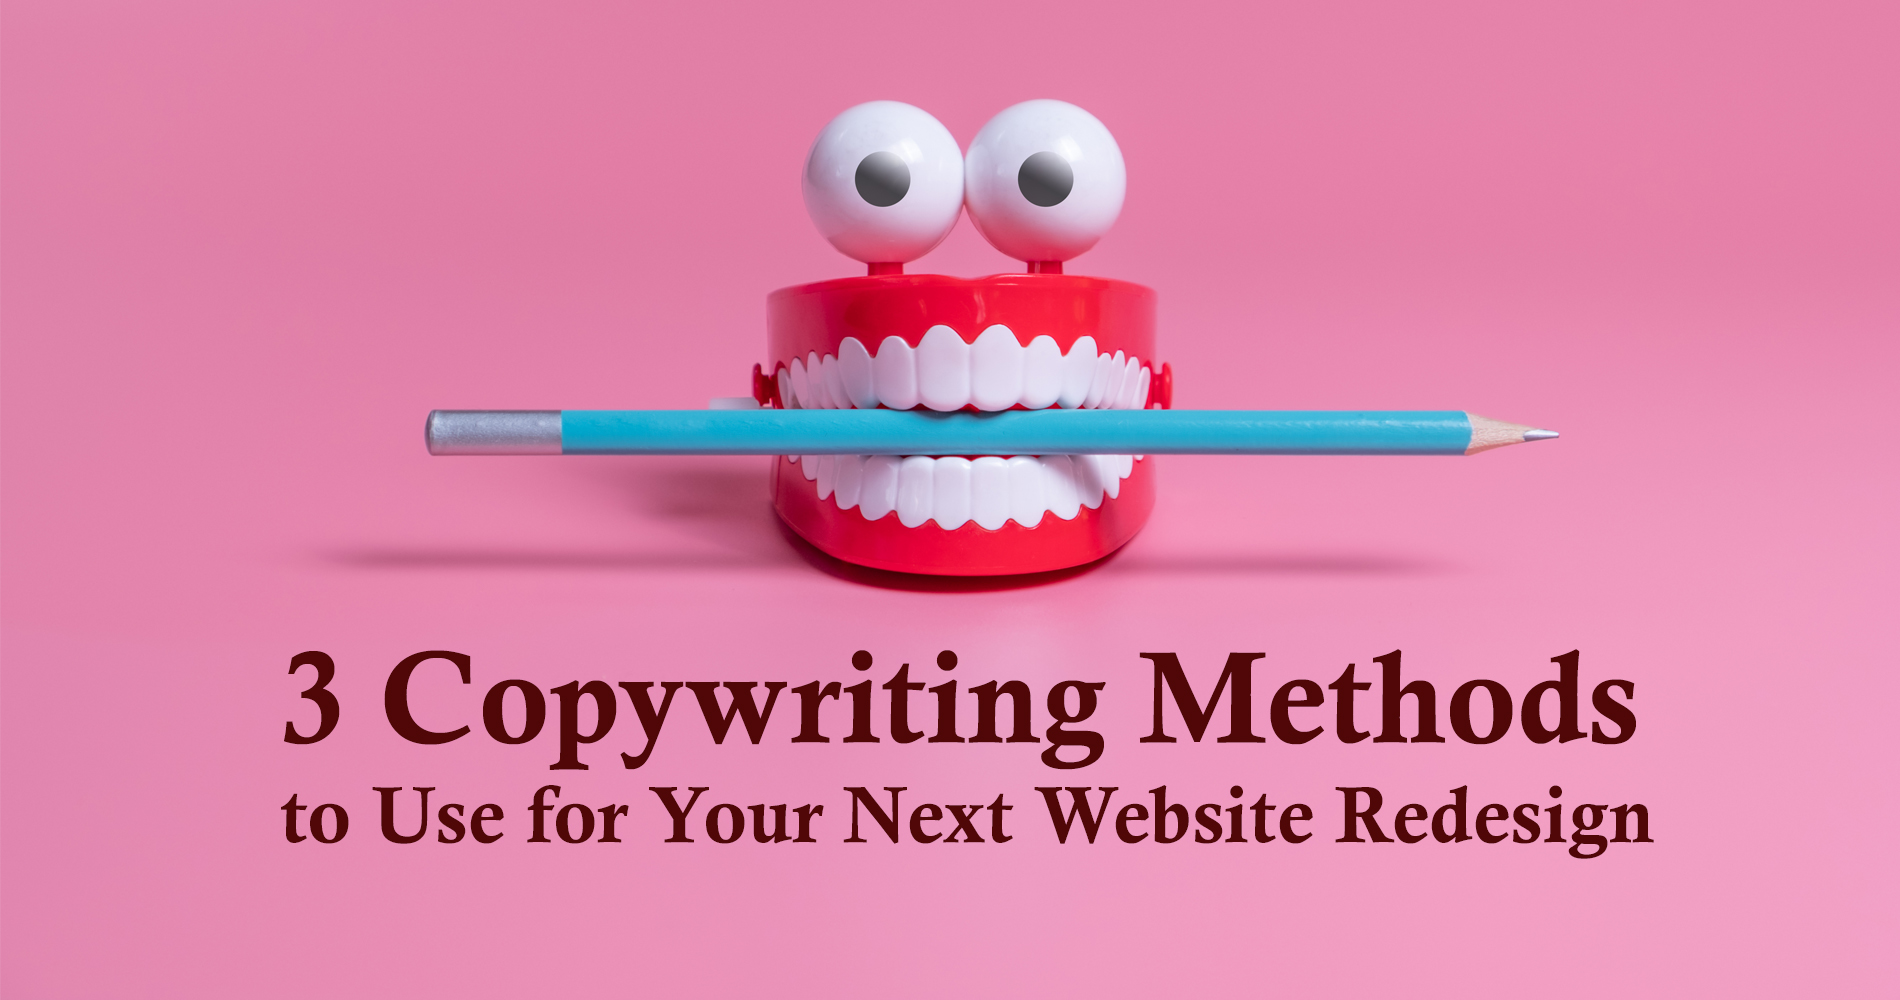 3 Copywriting Methods to Use for Your Next Website Redesign